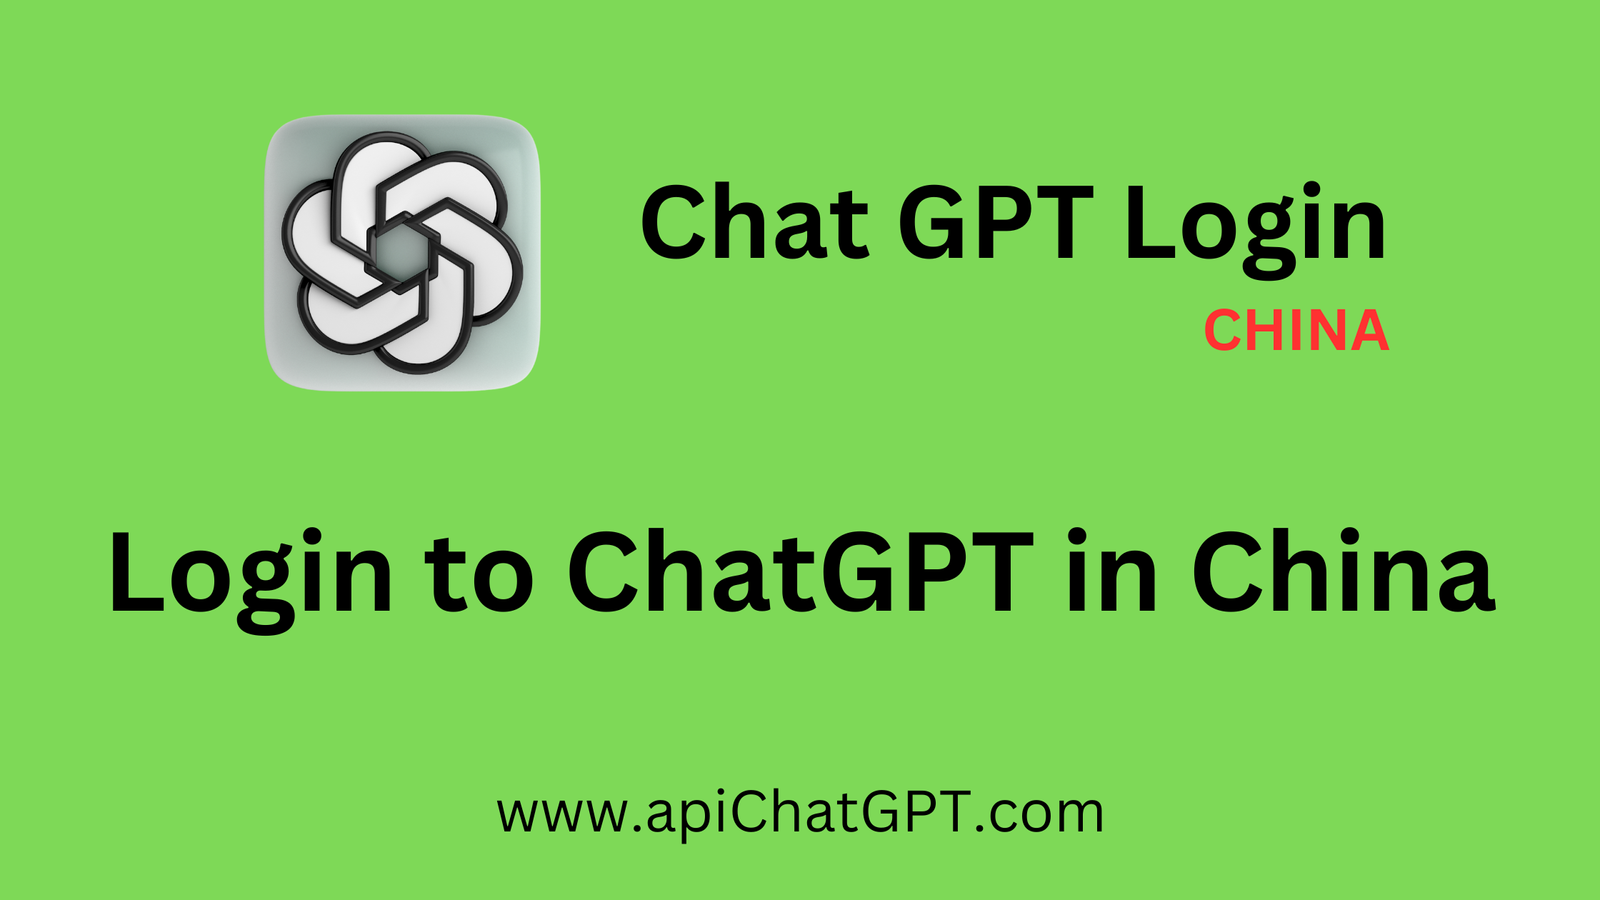 Login to ChatGPT in China - Chat GPT Login